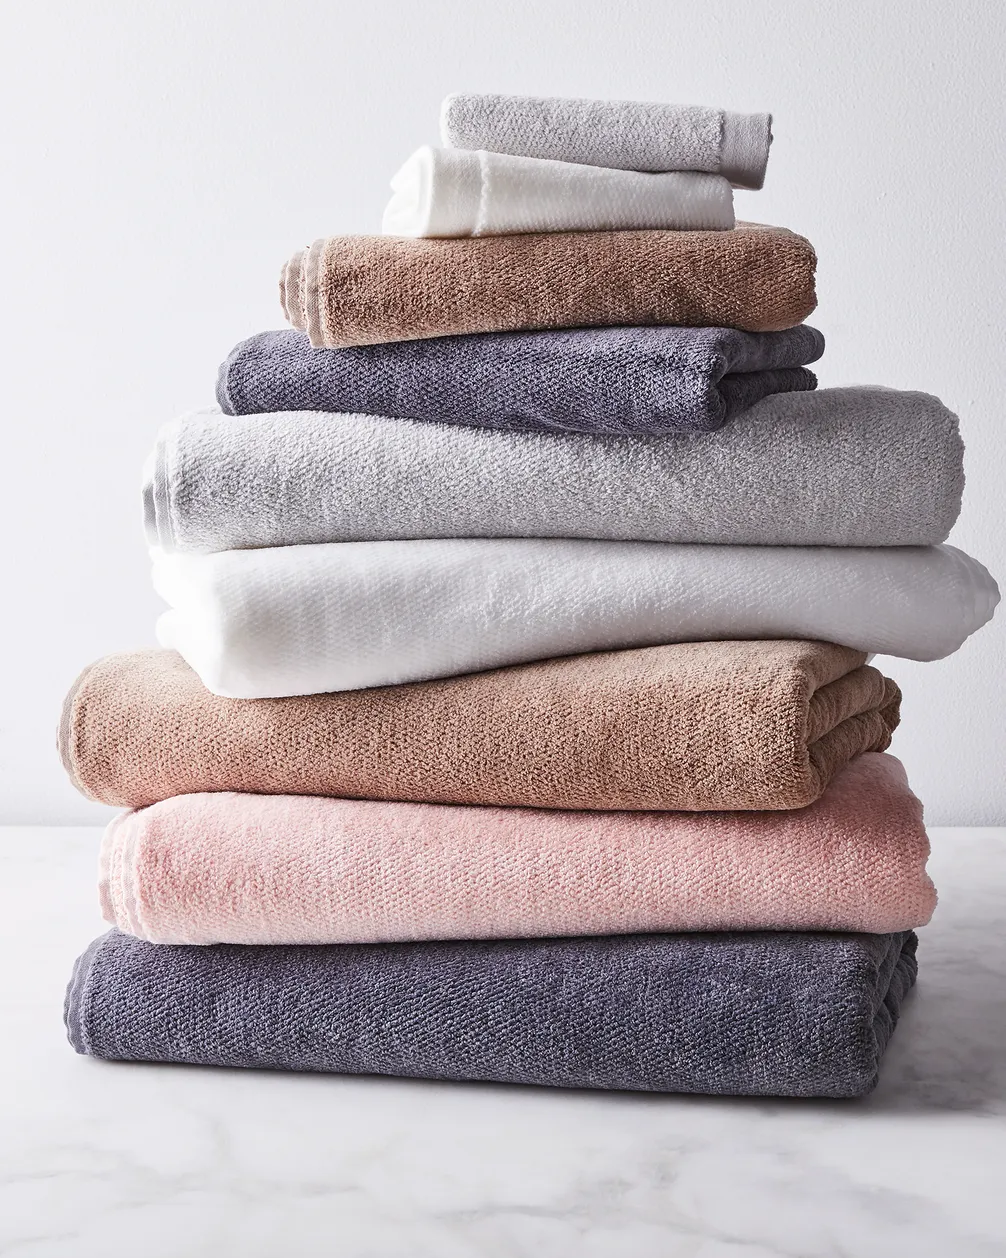 4 Smarty-Pants Tips for Making Your Towels Feel New Again